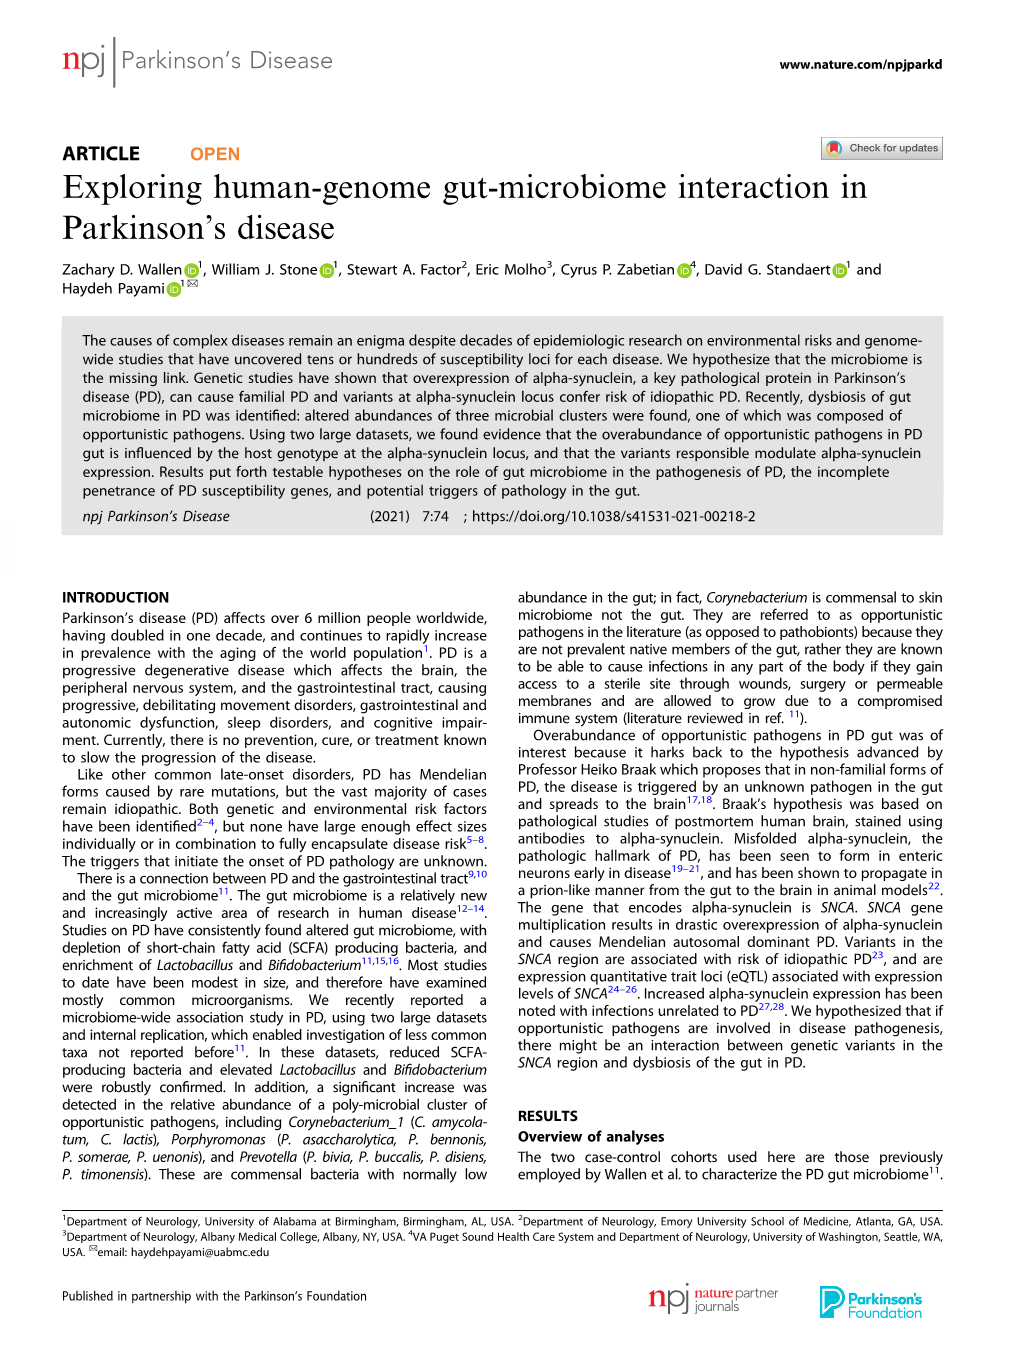 Exploring Human-Genome Gut-Microbiome Interaction in Parkinson’S Disease